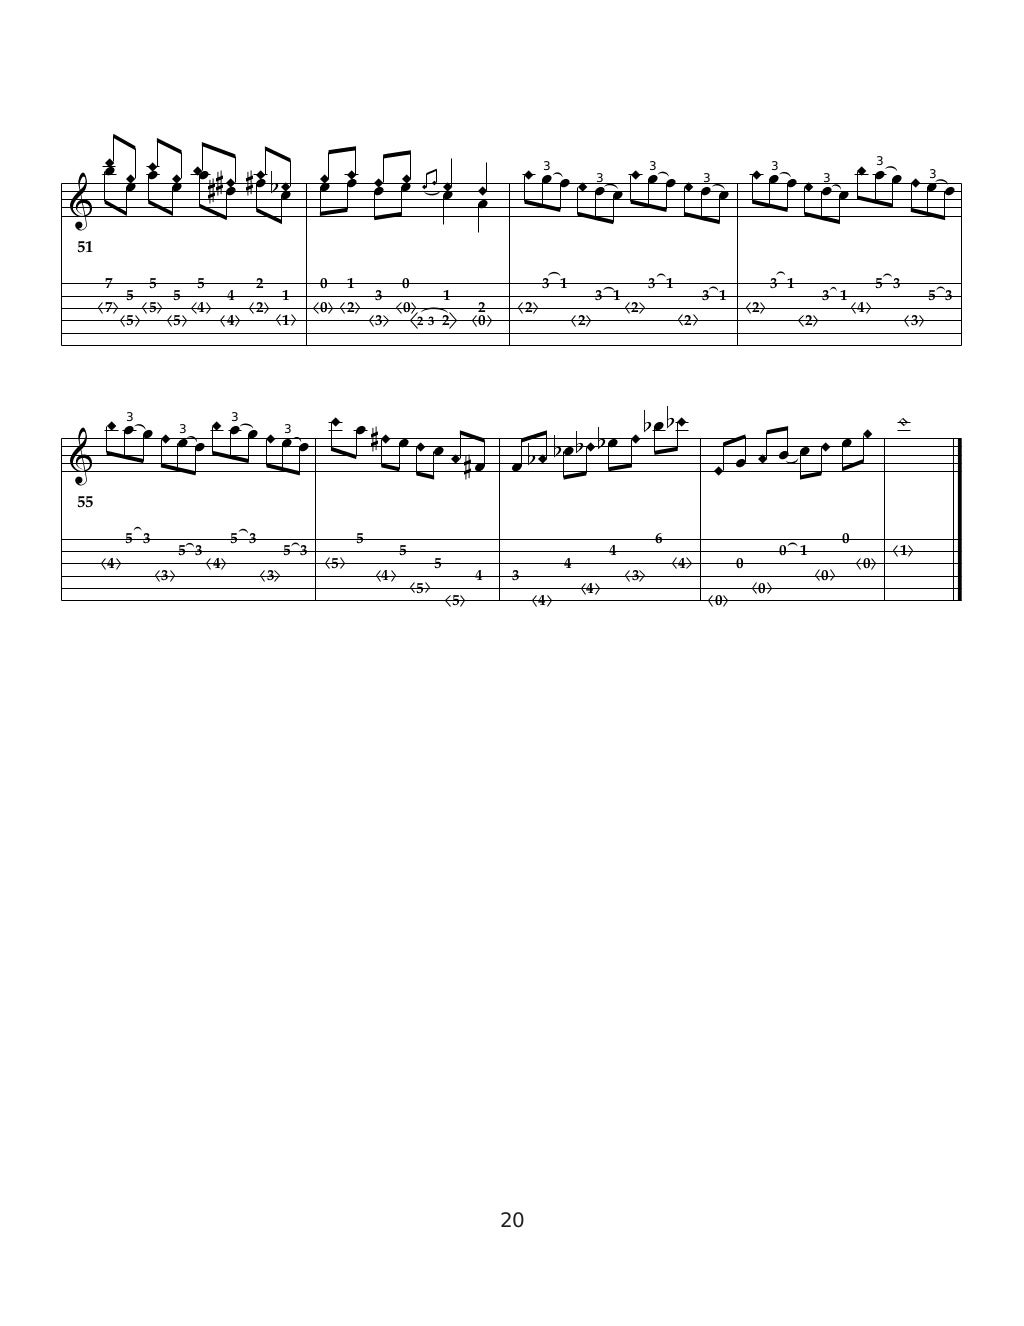 Blue Angel by Chet Atkins - Guitar Tab - Guitar Instructor